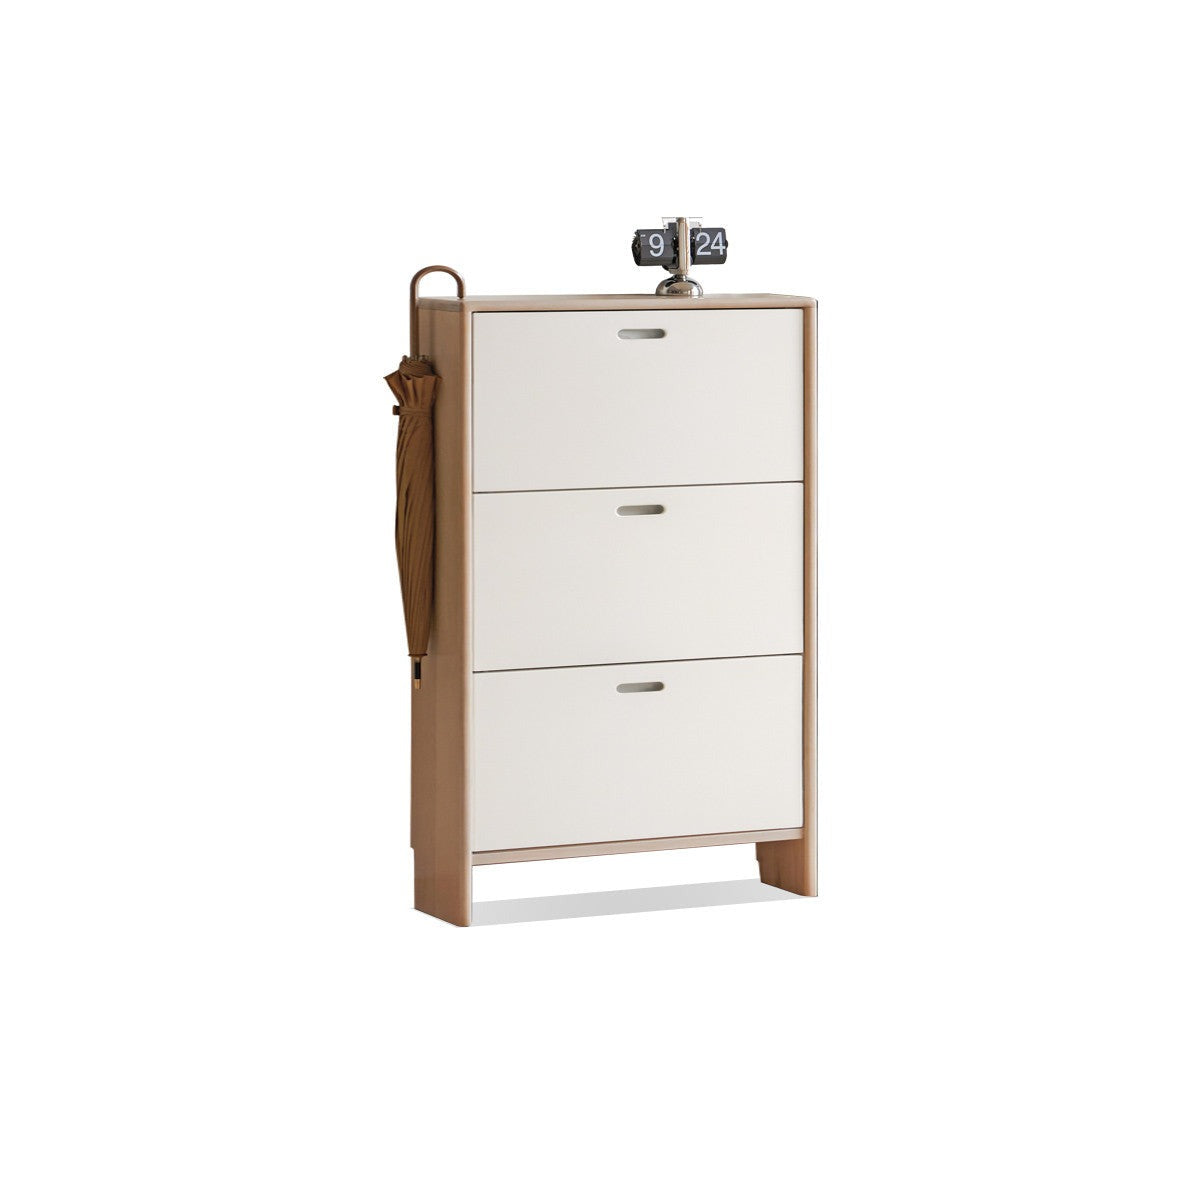 Birch solid wood ultra-thin shoe cabinet"+